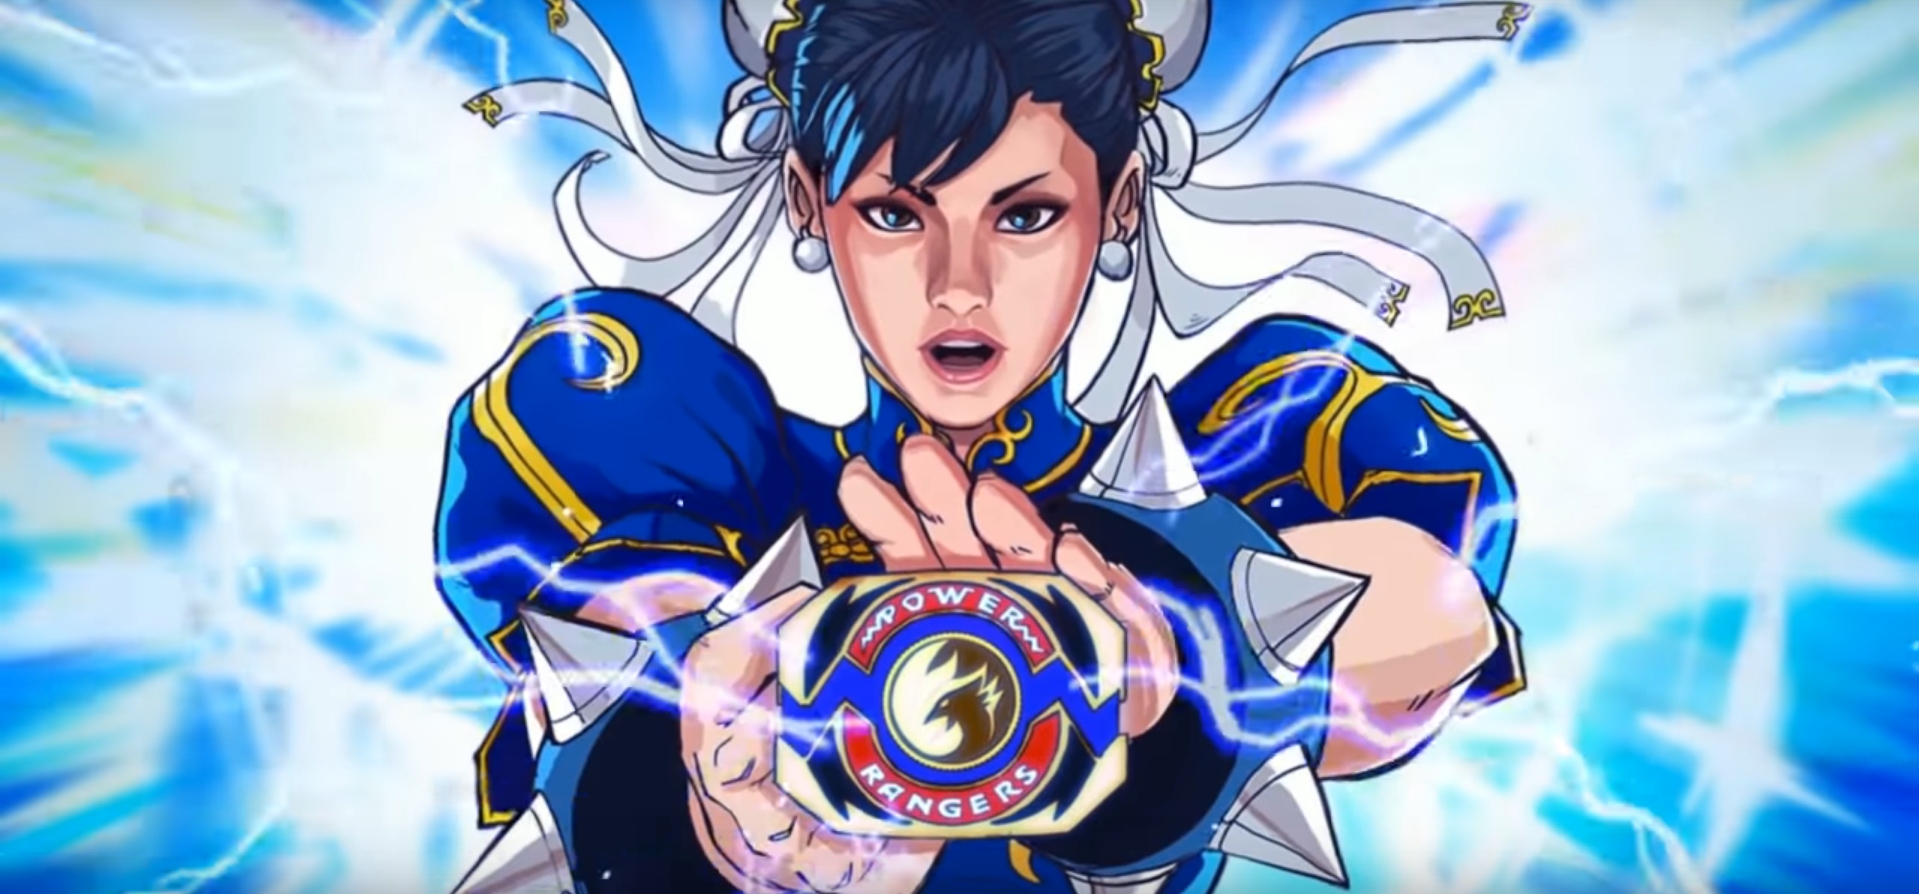 Power Rangers: Legacy Wars Adds Chun-Li As Part Of Street Fighter Crossover Event